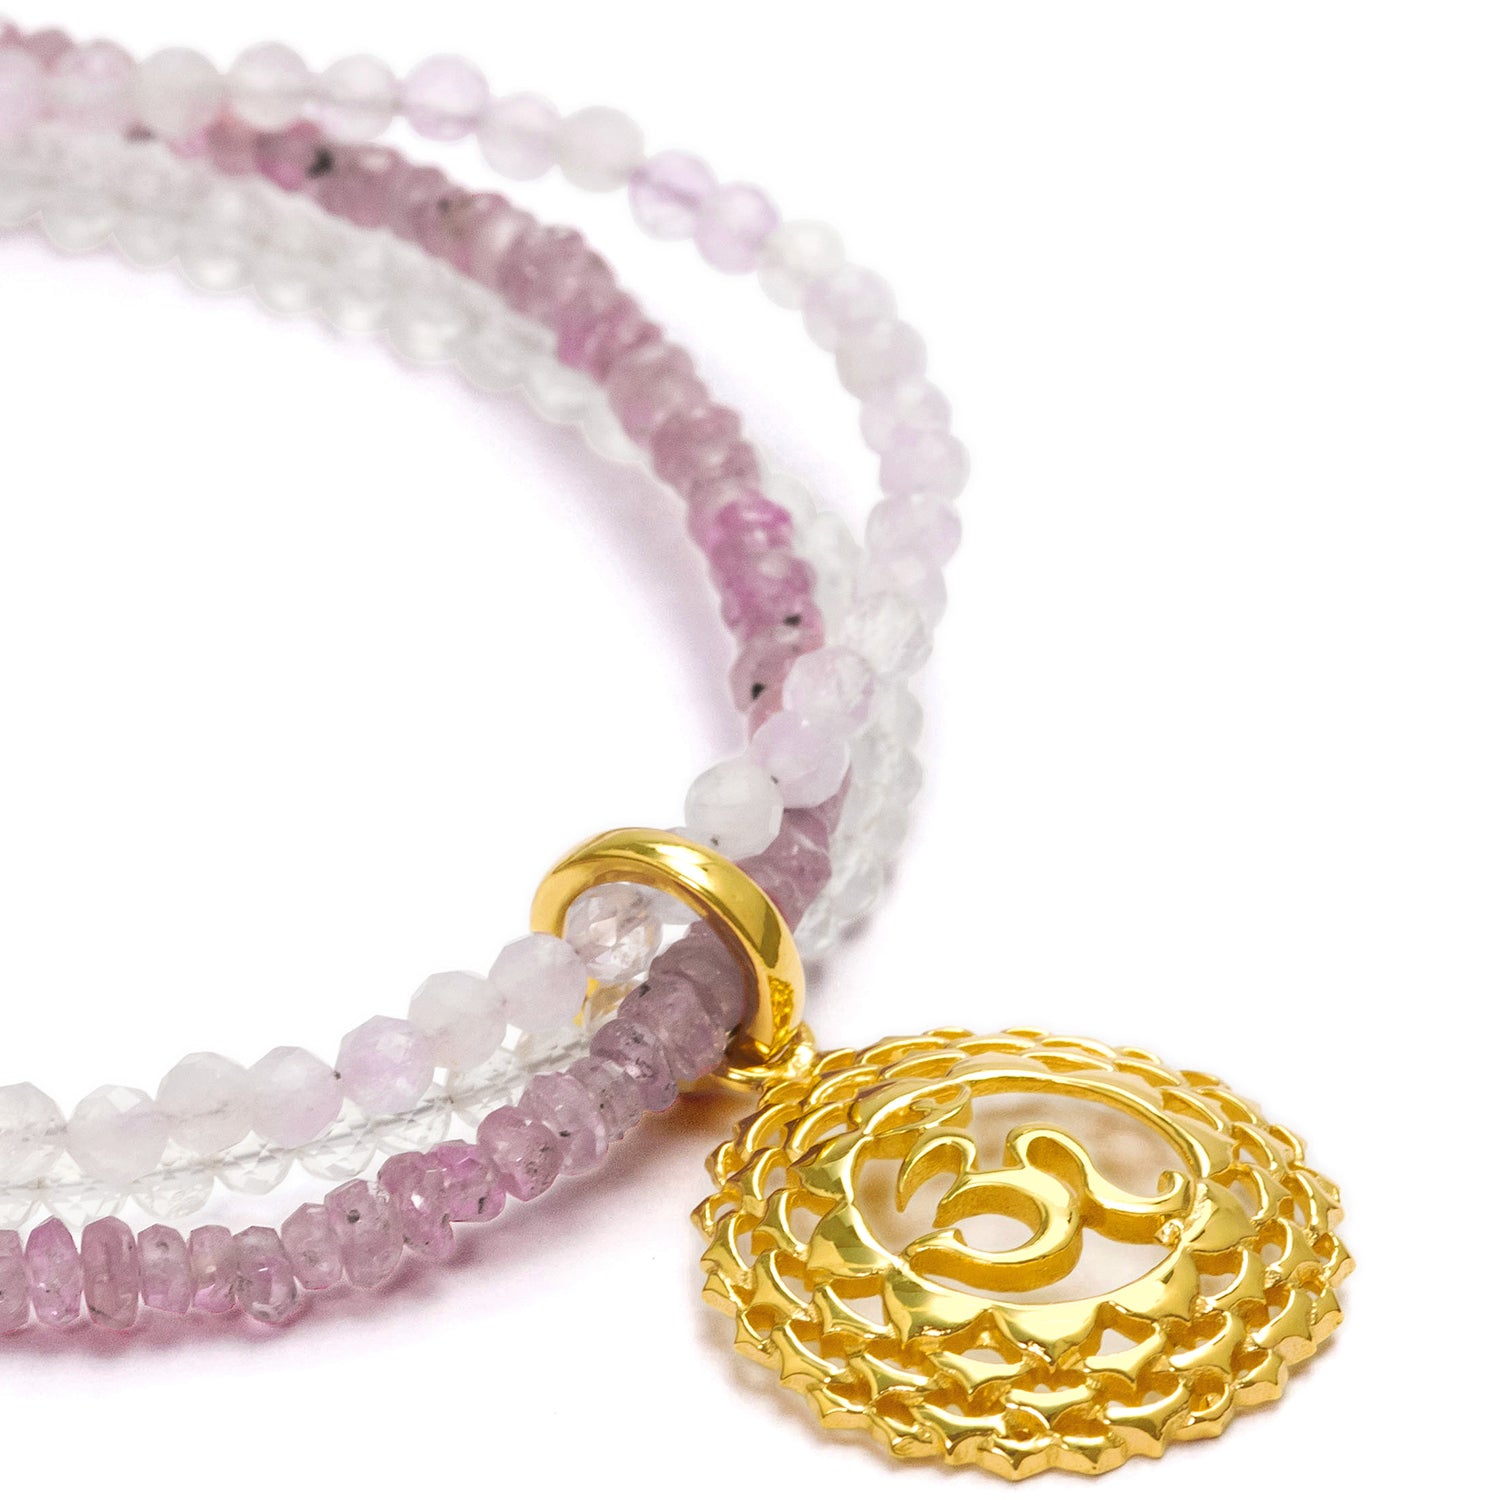 Crown Chakra bracelet with gemstones gold-plated silver by ETERNAL BLISS - Spiritual Jewellery